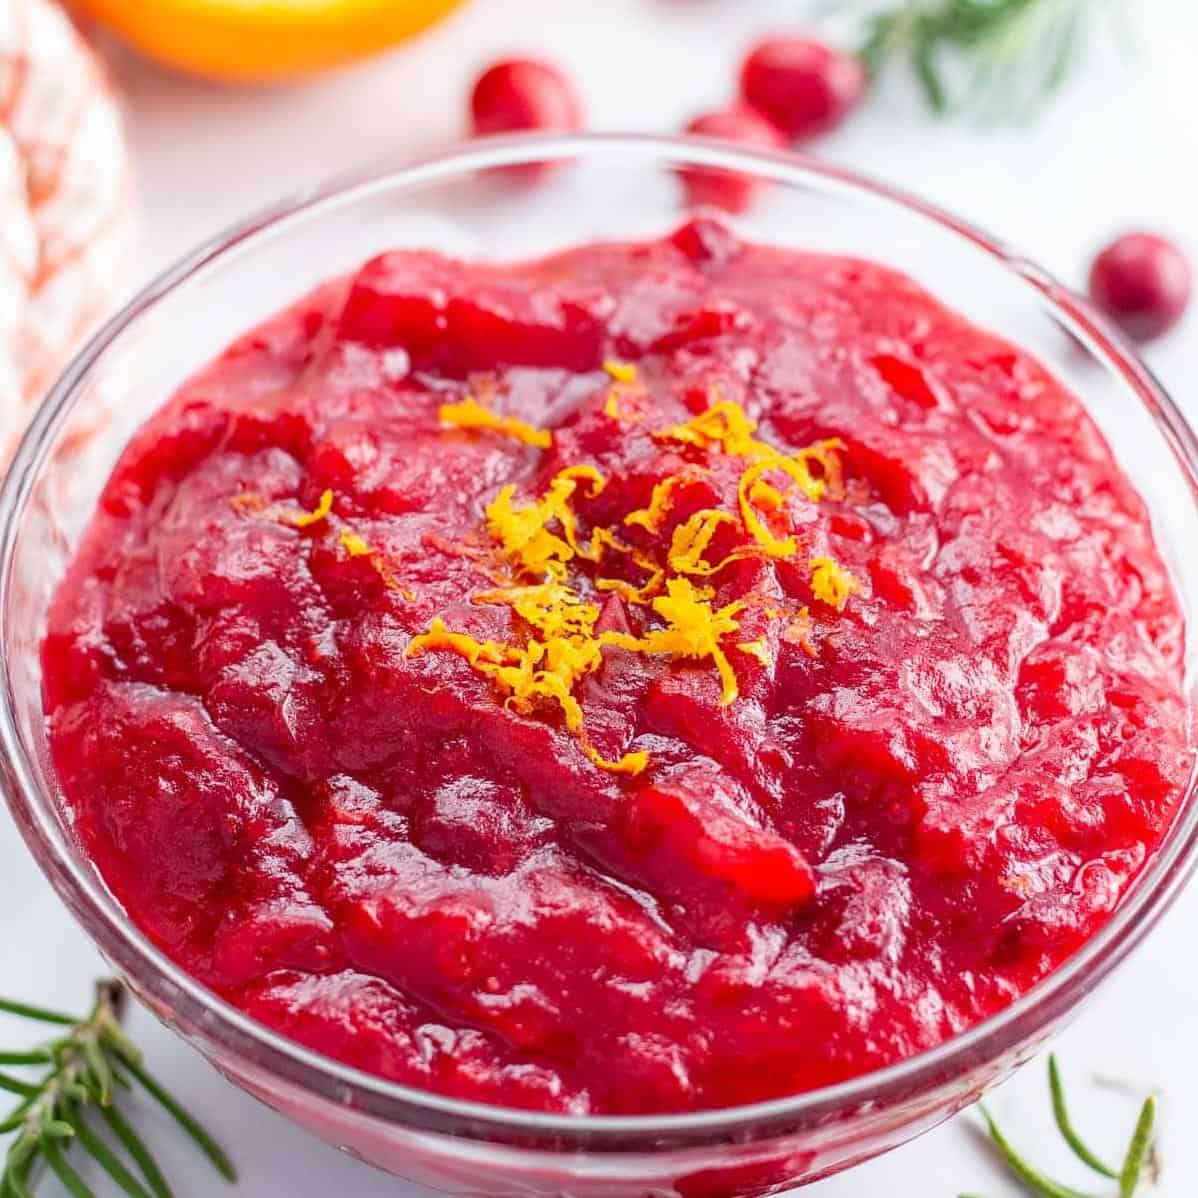  Sweet meets tangy in this cranberry sauce recipe.